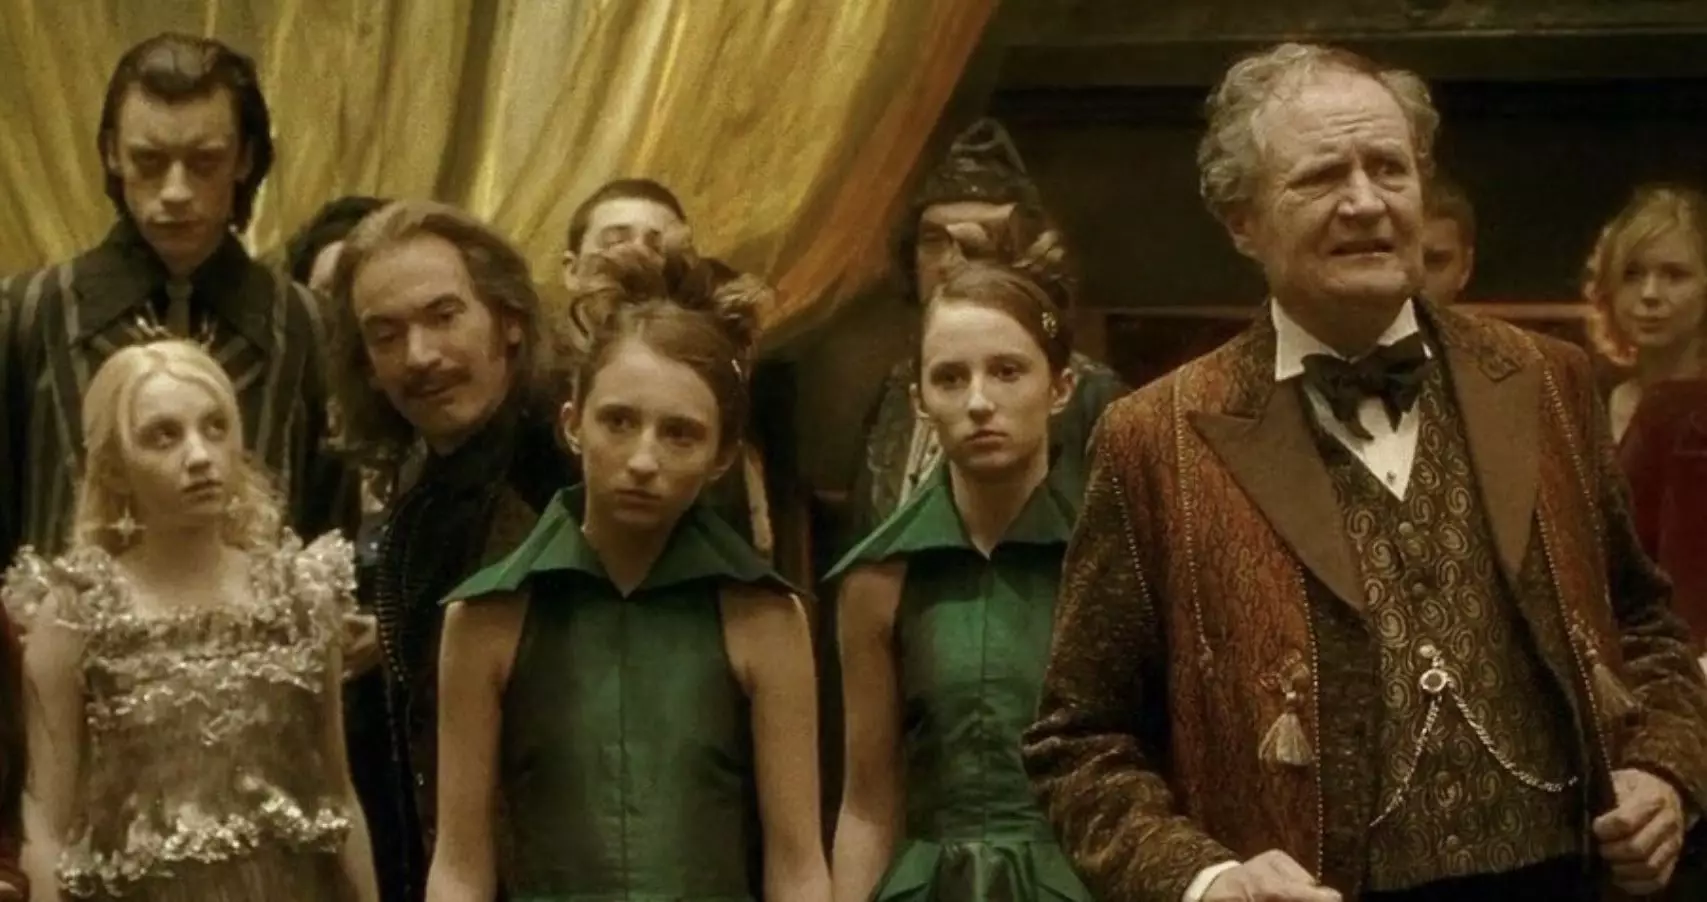 The actor played wizard Eldred Worple in Harry Potter and the Half-Blood Prince (